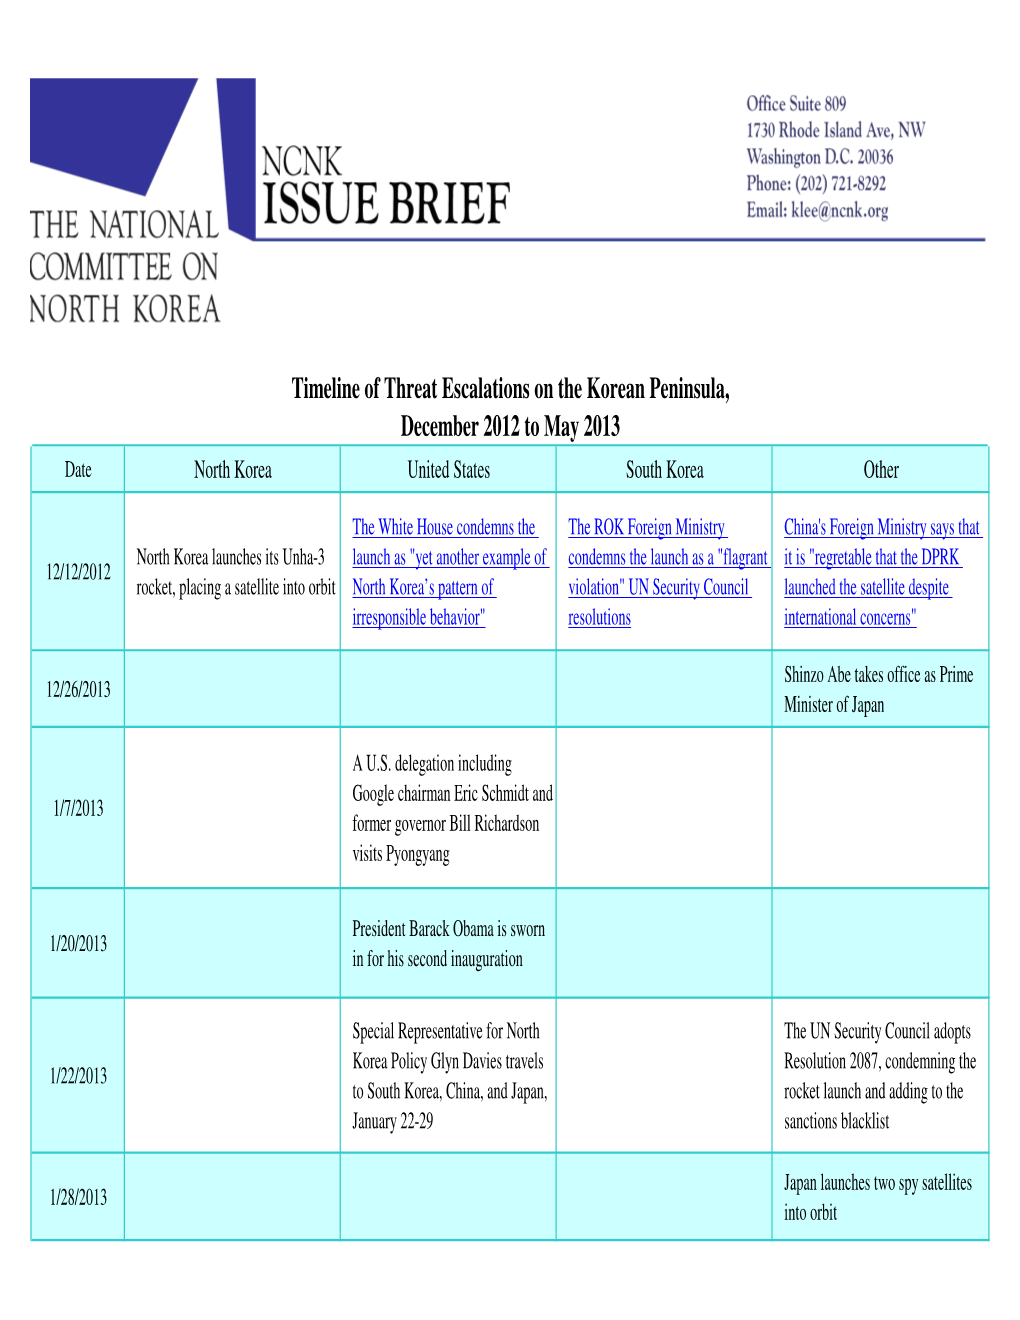 Timeline of Threat Escalations on the Korean Peninsula, December 2012 to May 2013 Date North Korea United States South Korea Other